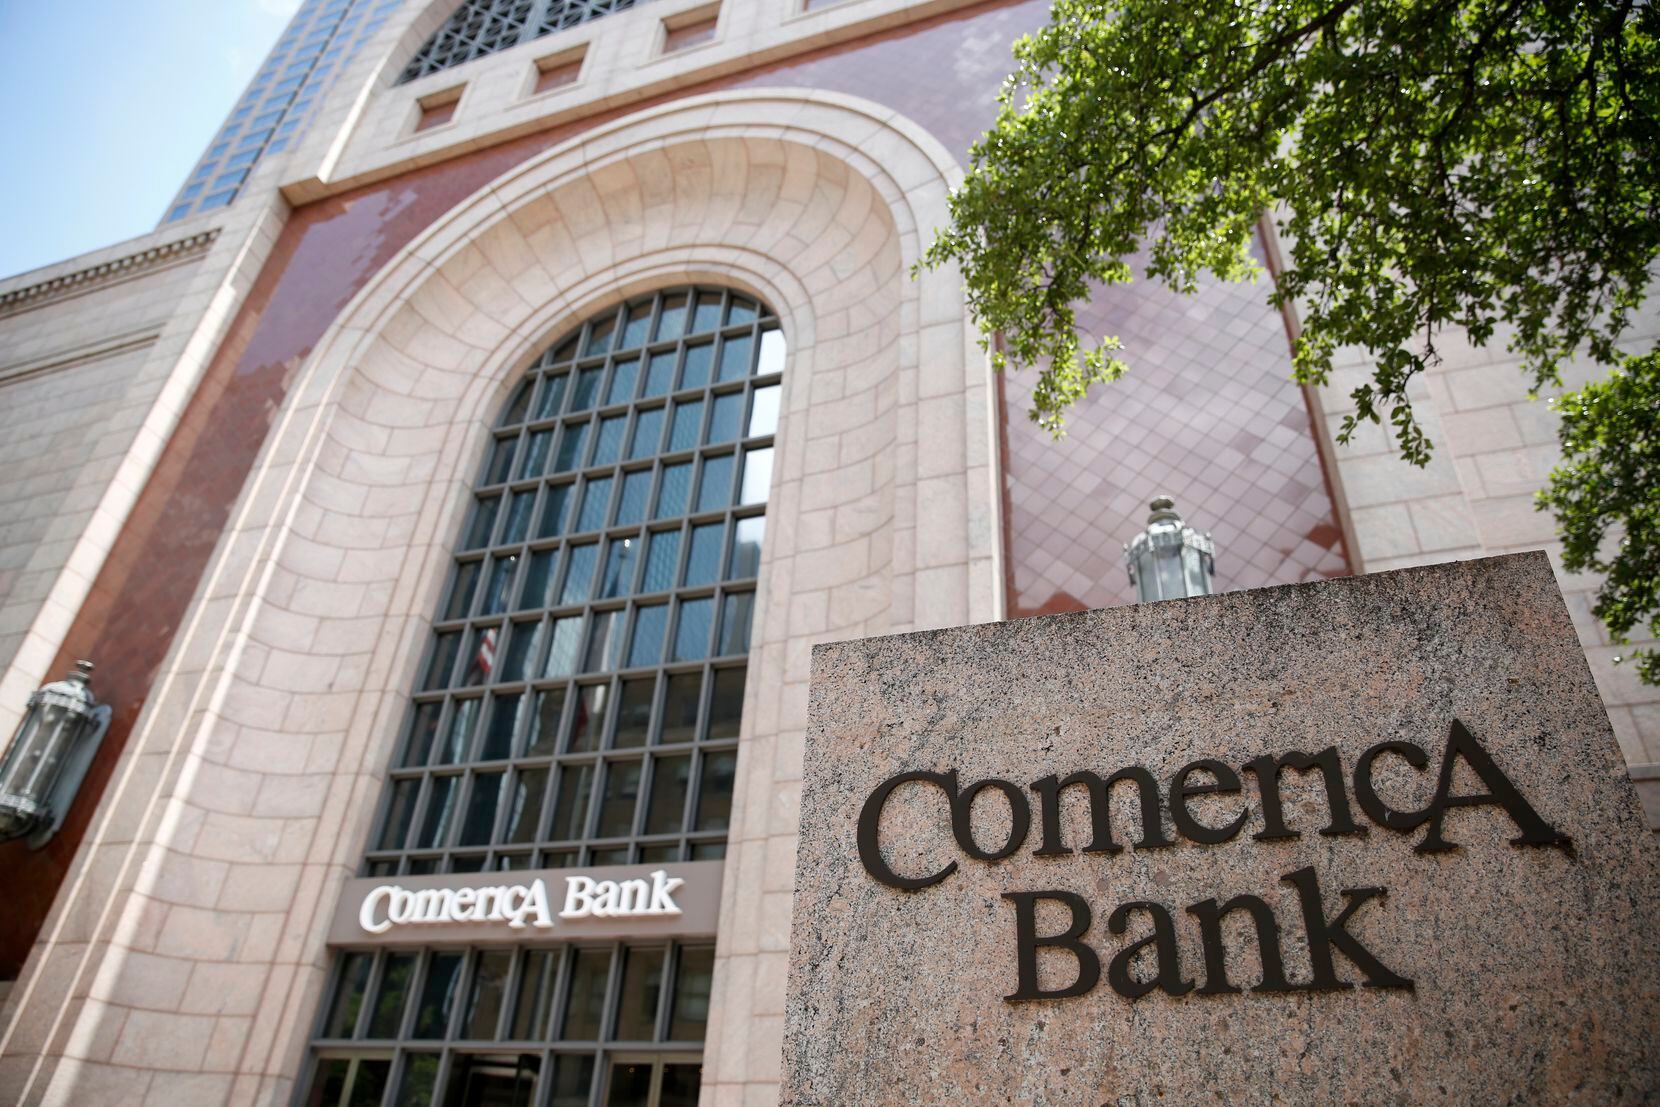 Comerica is keeping its headquarters in the Comerica Bank Tower in downtown Dallas.